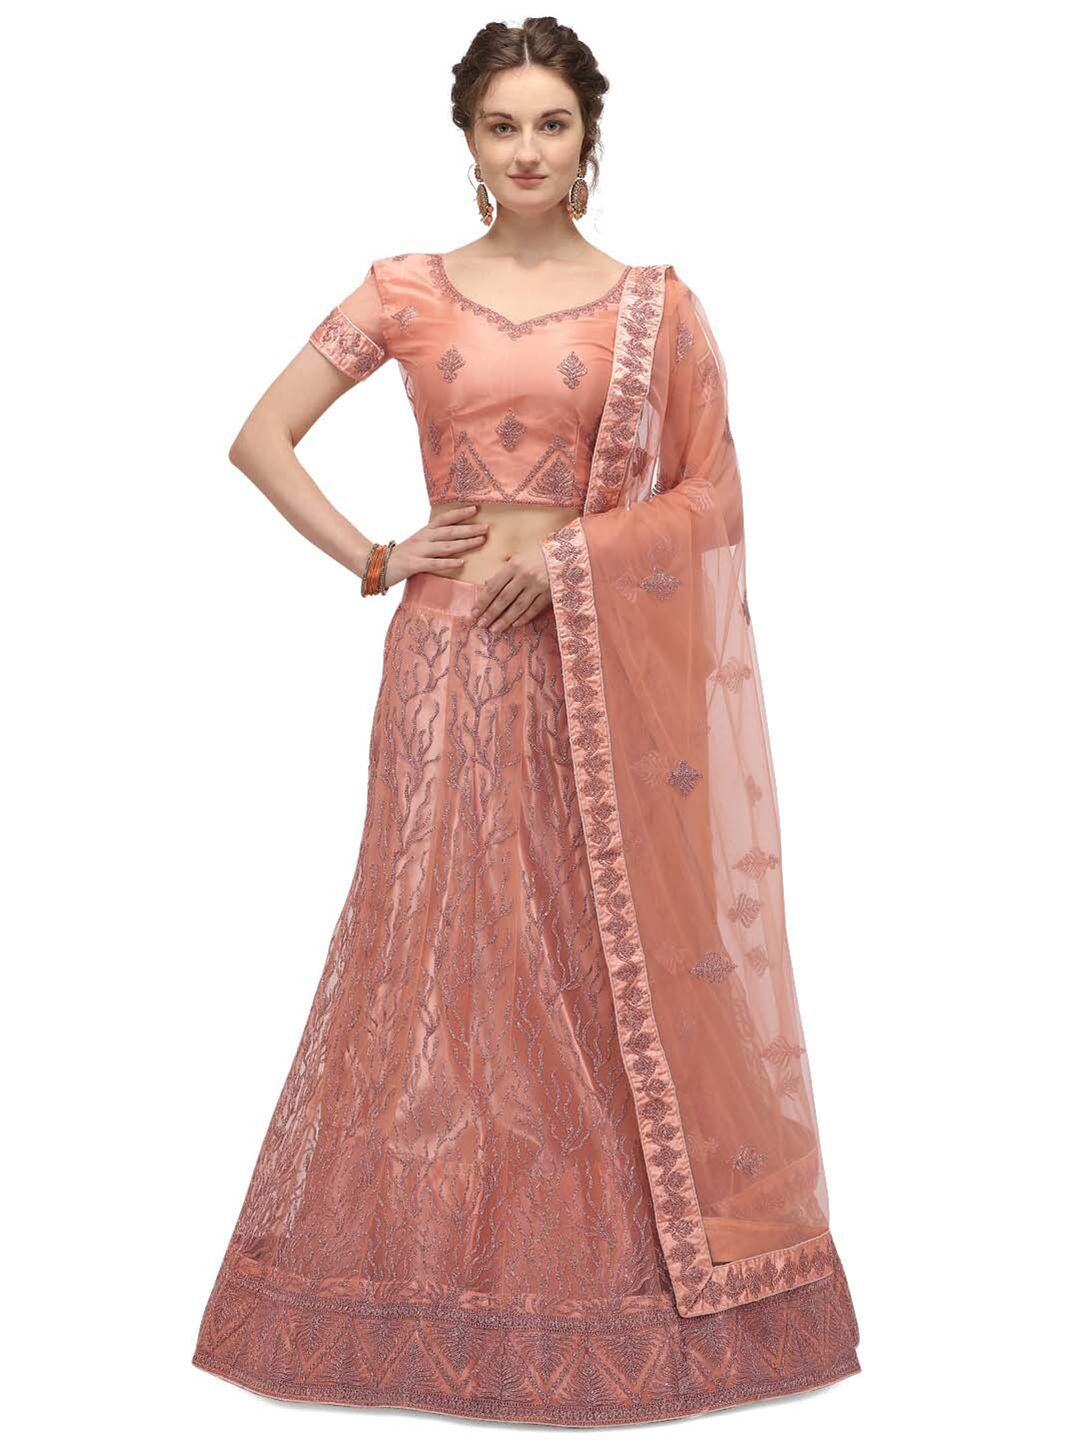 Netram Peach-Coloured & Silver-Toned Embroidered Semi-Stitched Lehenga & Unstitched Blouse With Dupatta Price in India